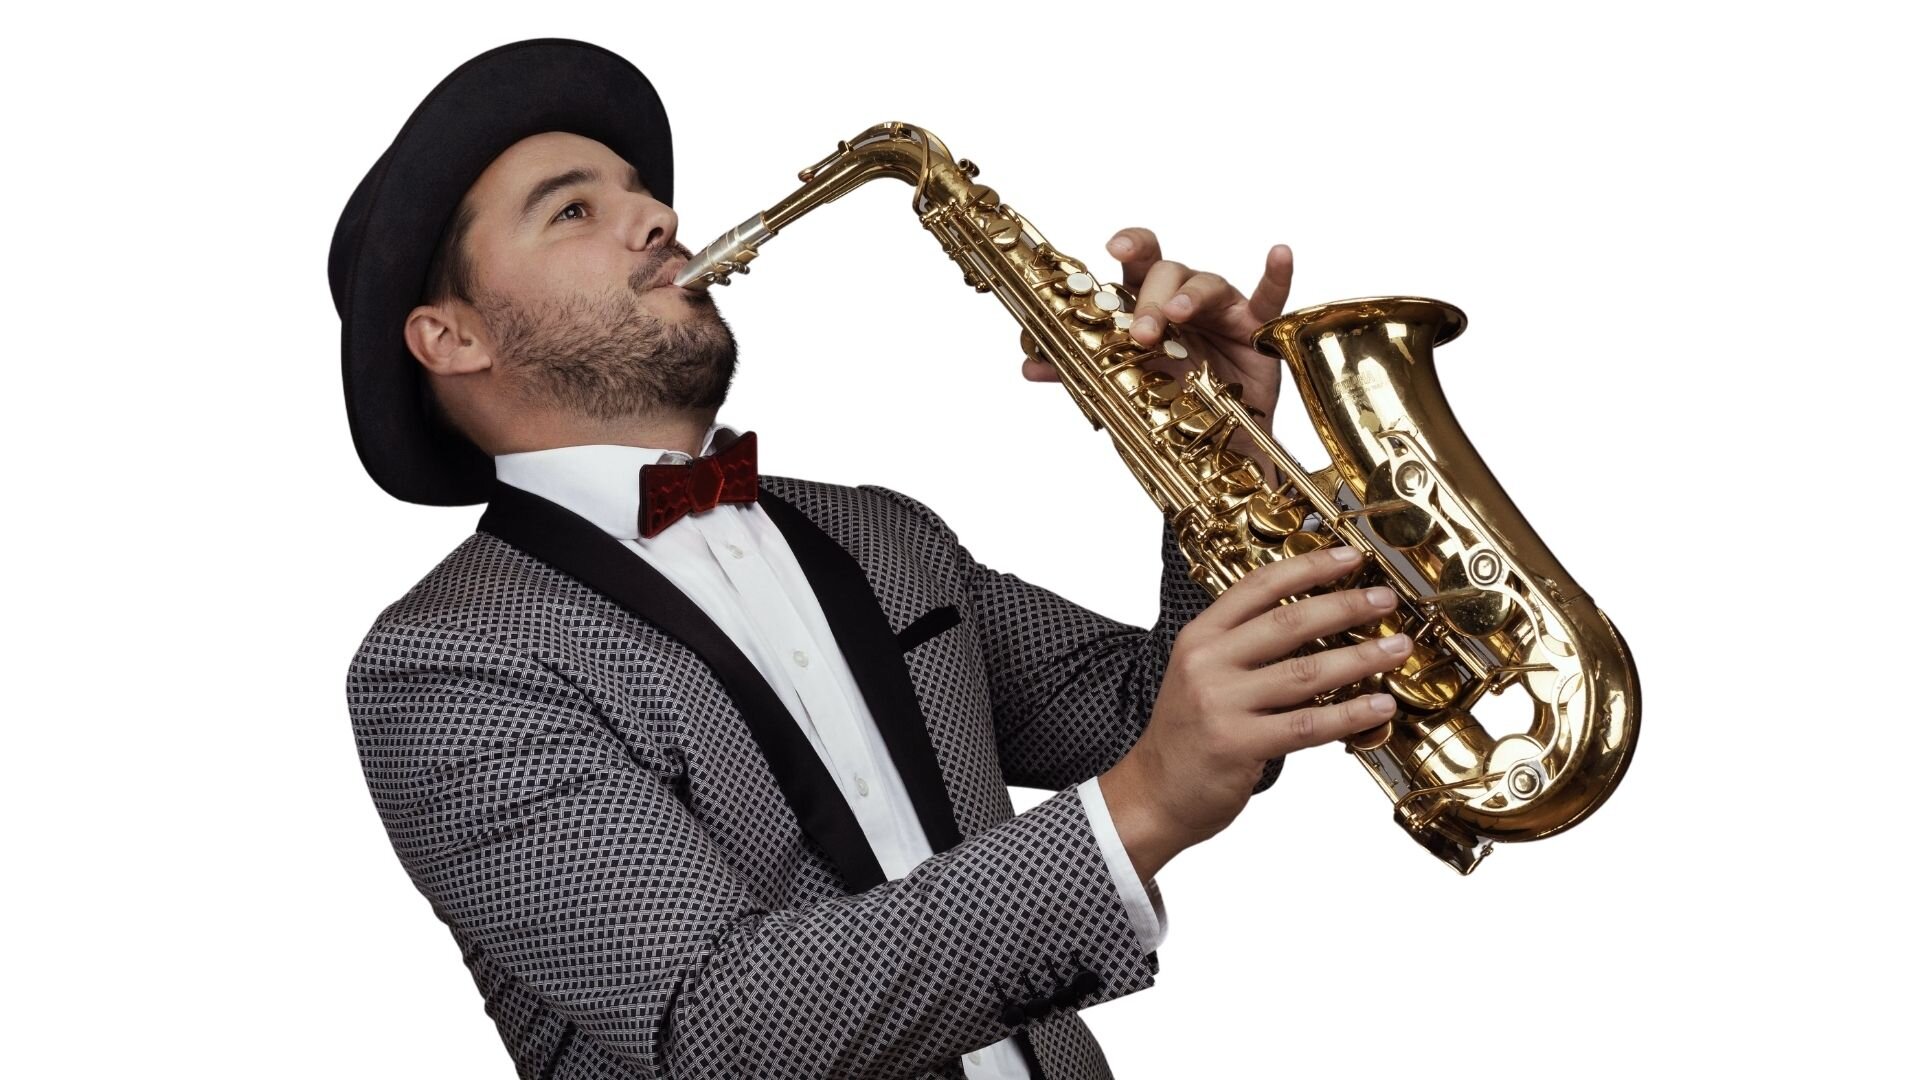 Australia's Entertainers — Australia's best leading saxophone players all round entertainers.